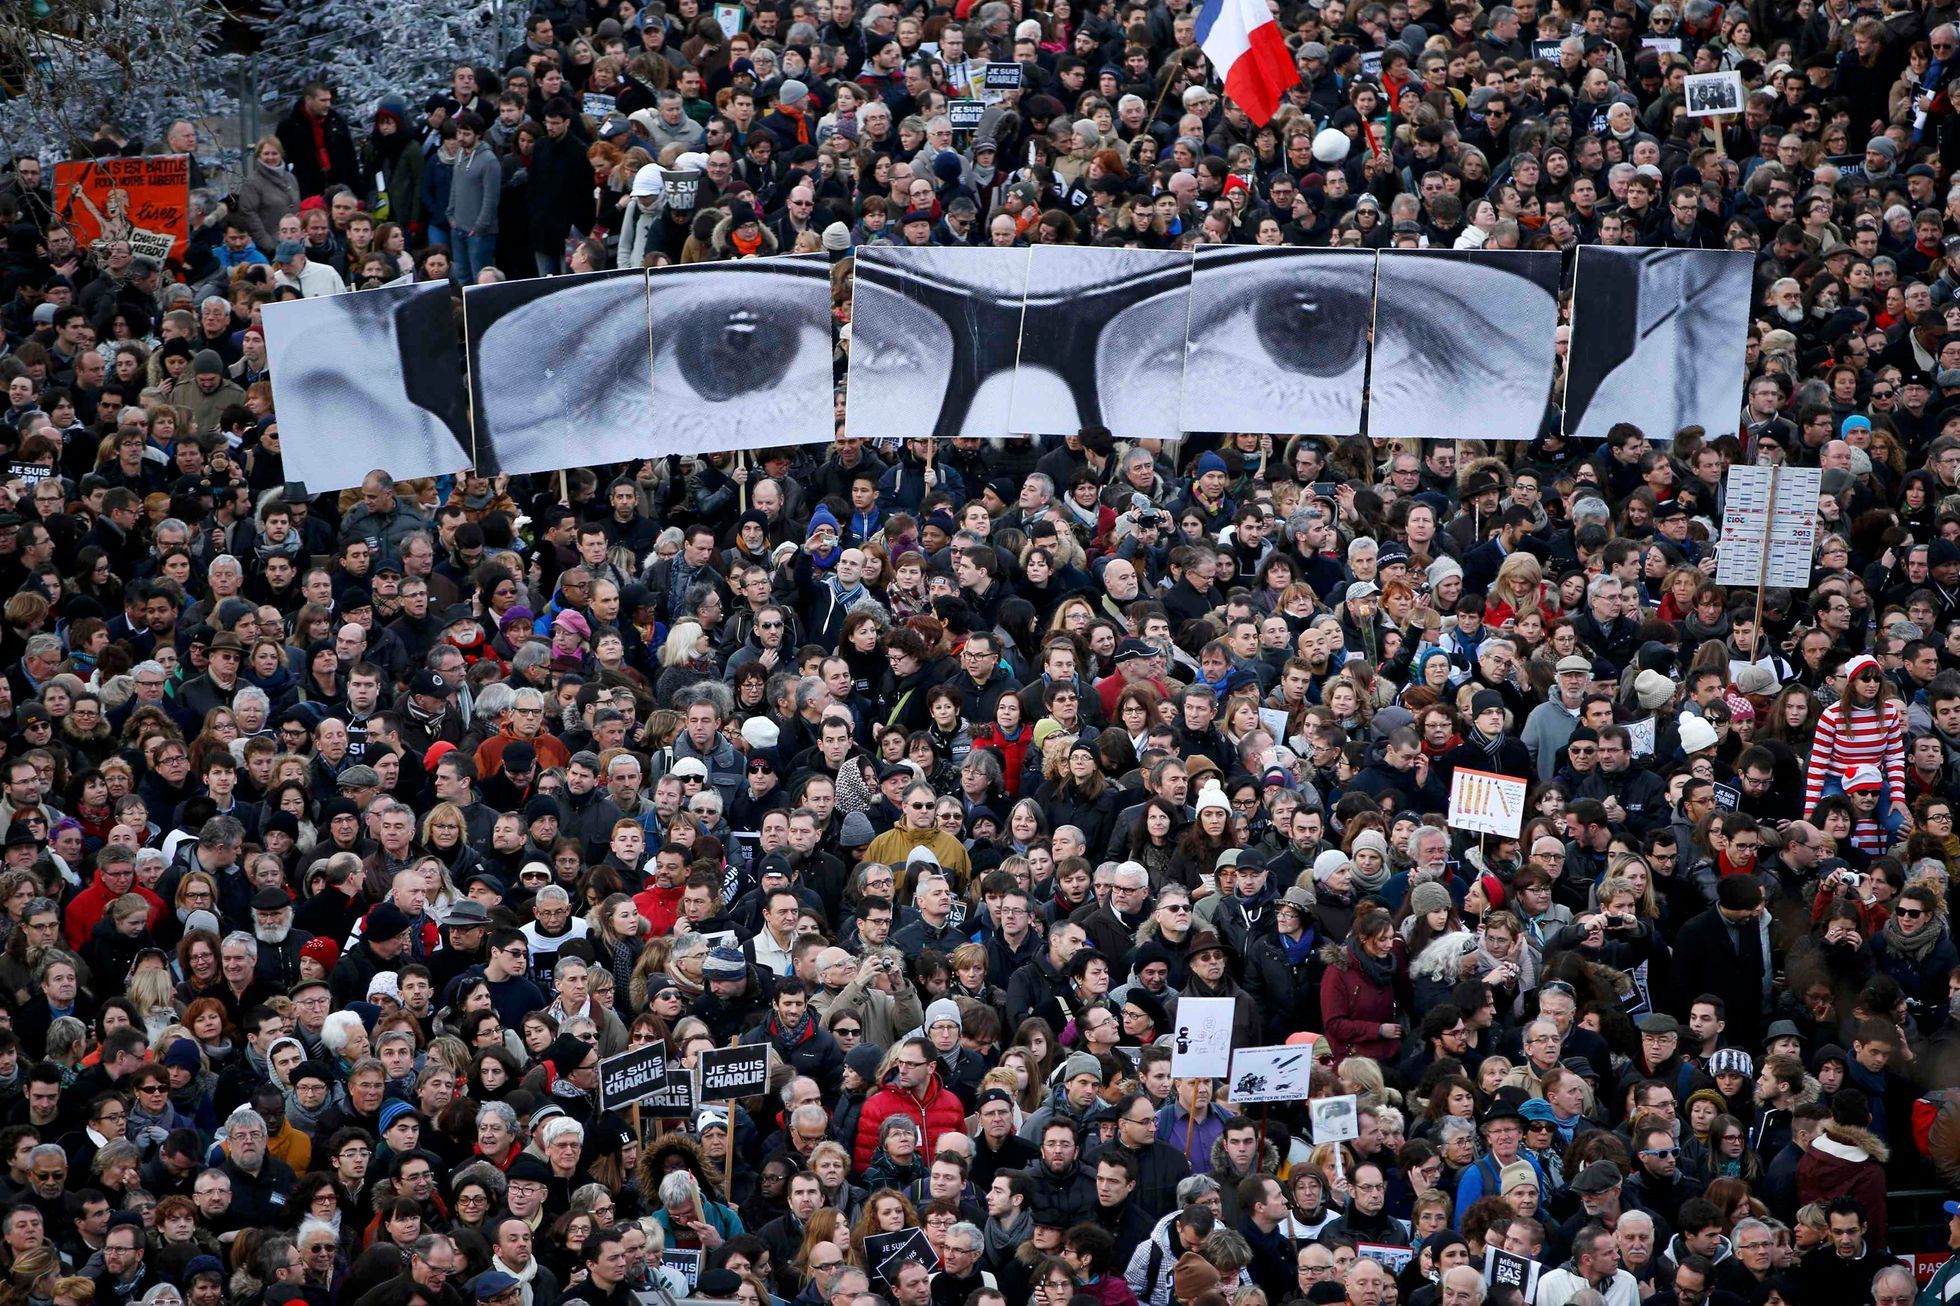 Hundreds of thousands of French citizens take part in a solidarity march (Marche Republicaine) in the streets of Paris